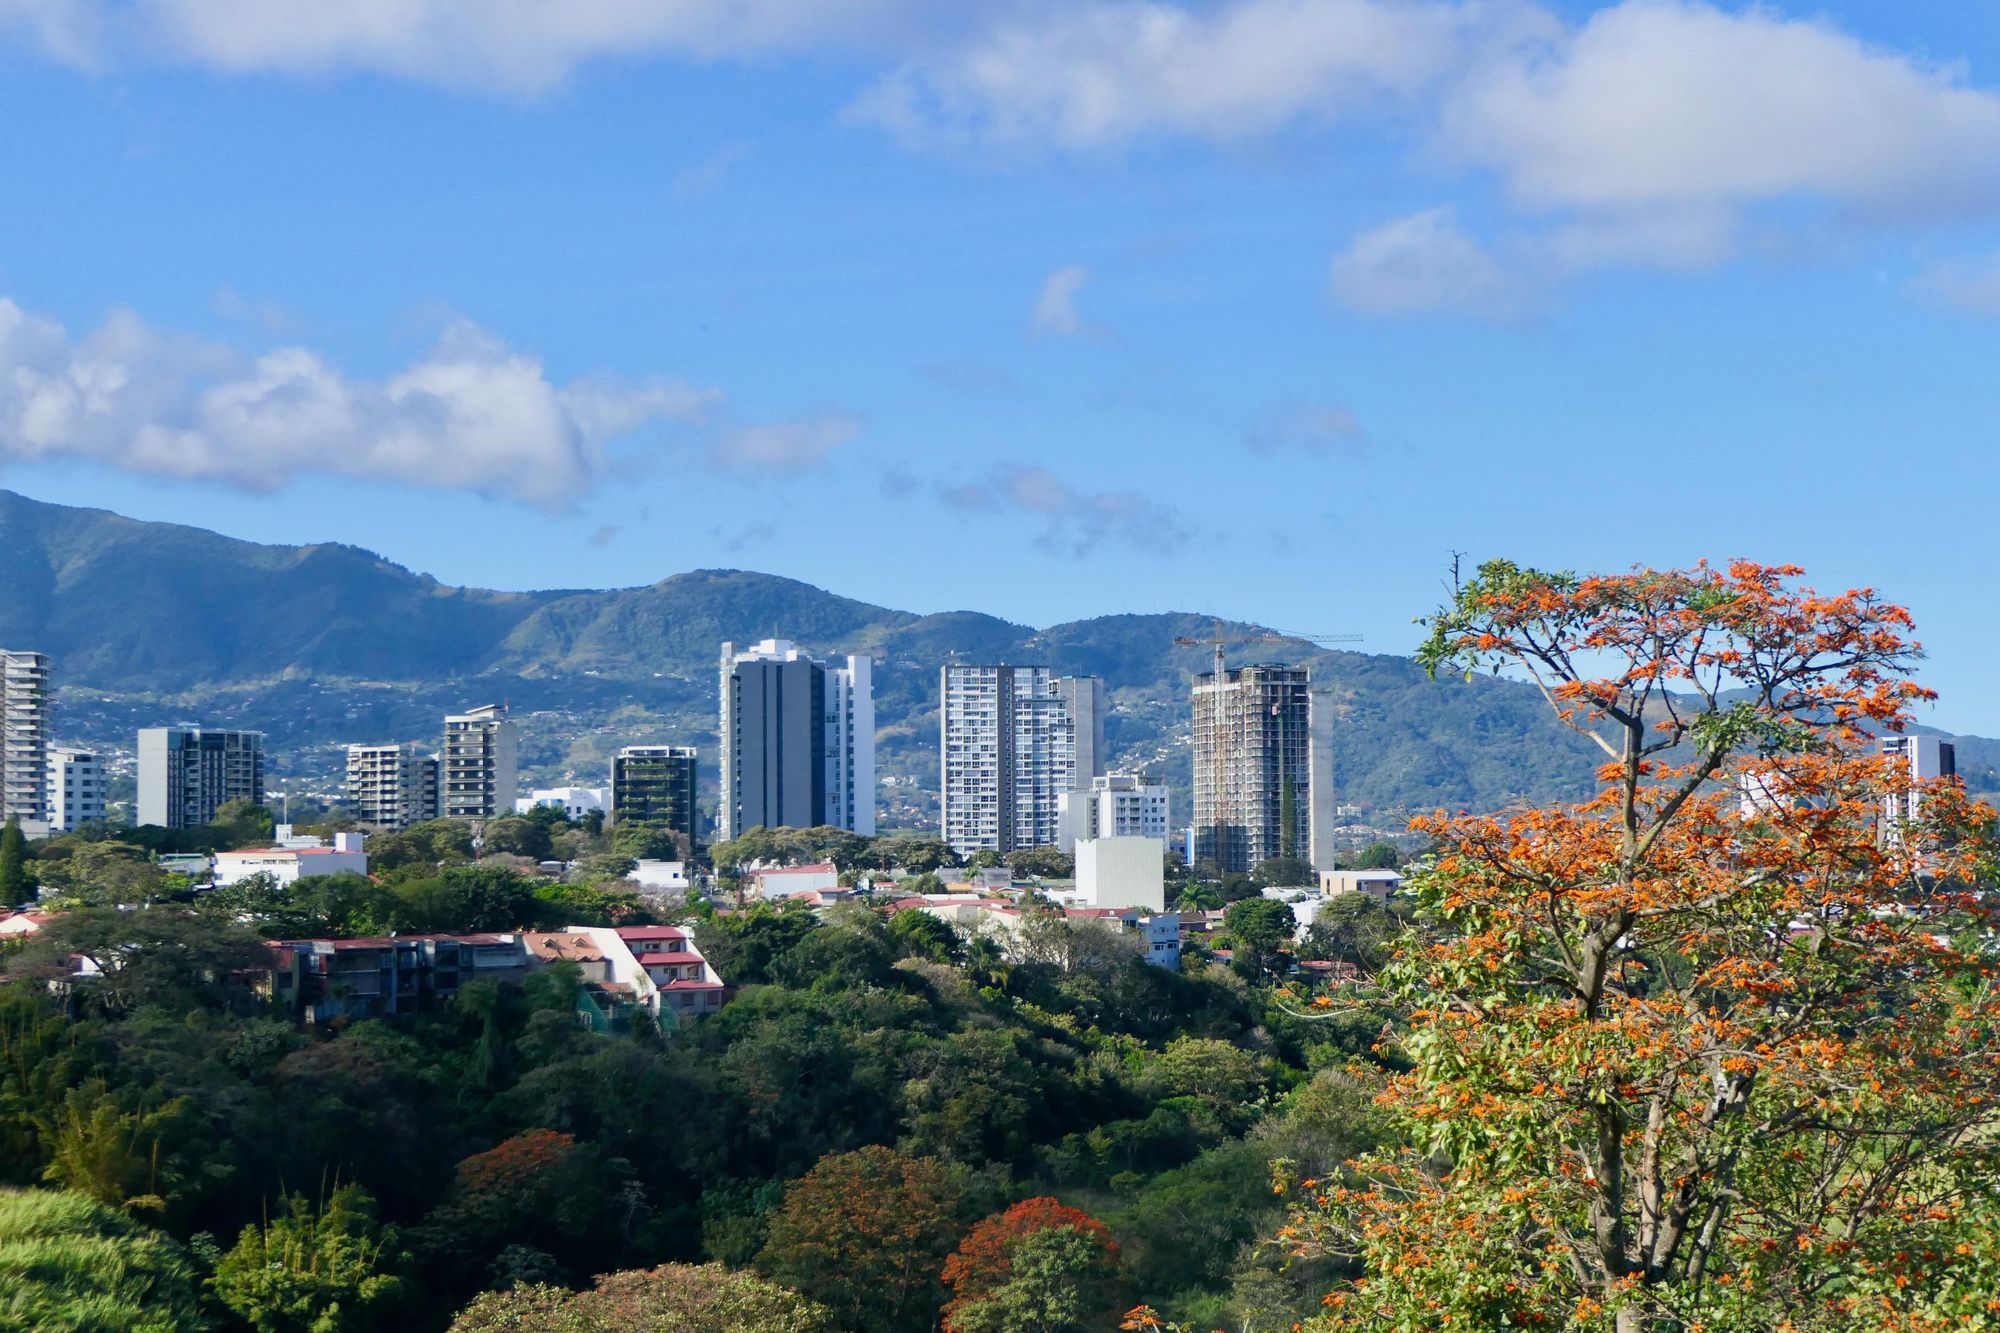 The city centre of San José, Costa Rica with mountans in the background. Photo: Getty